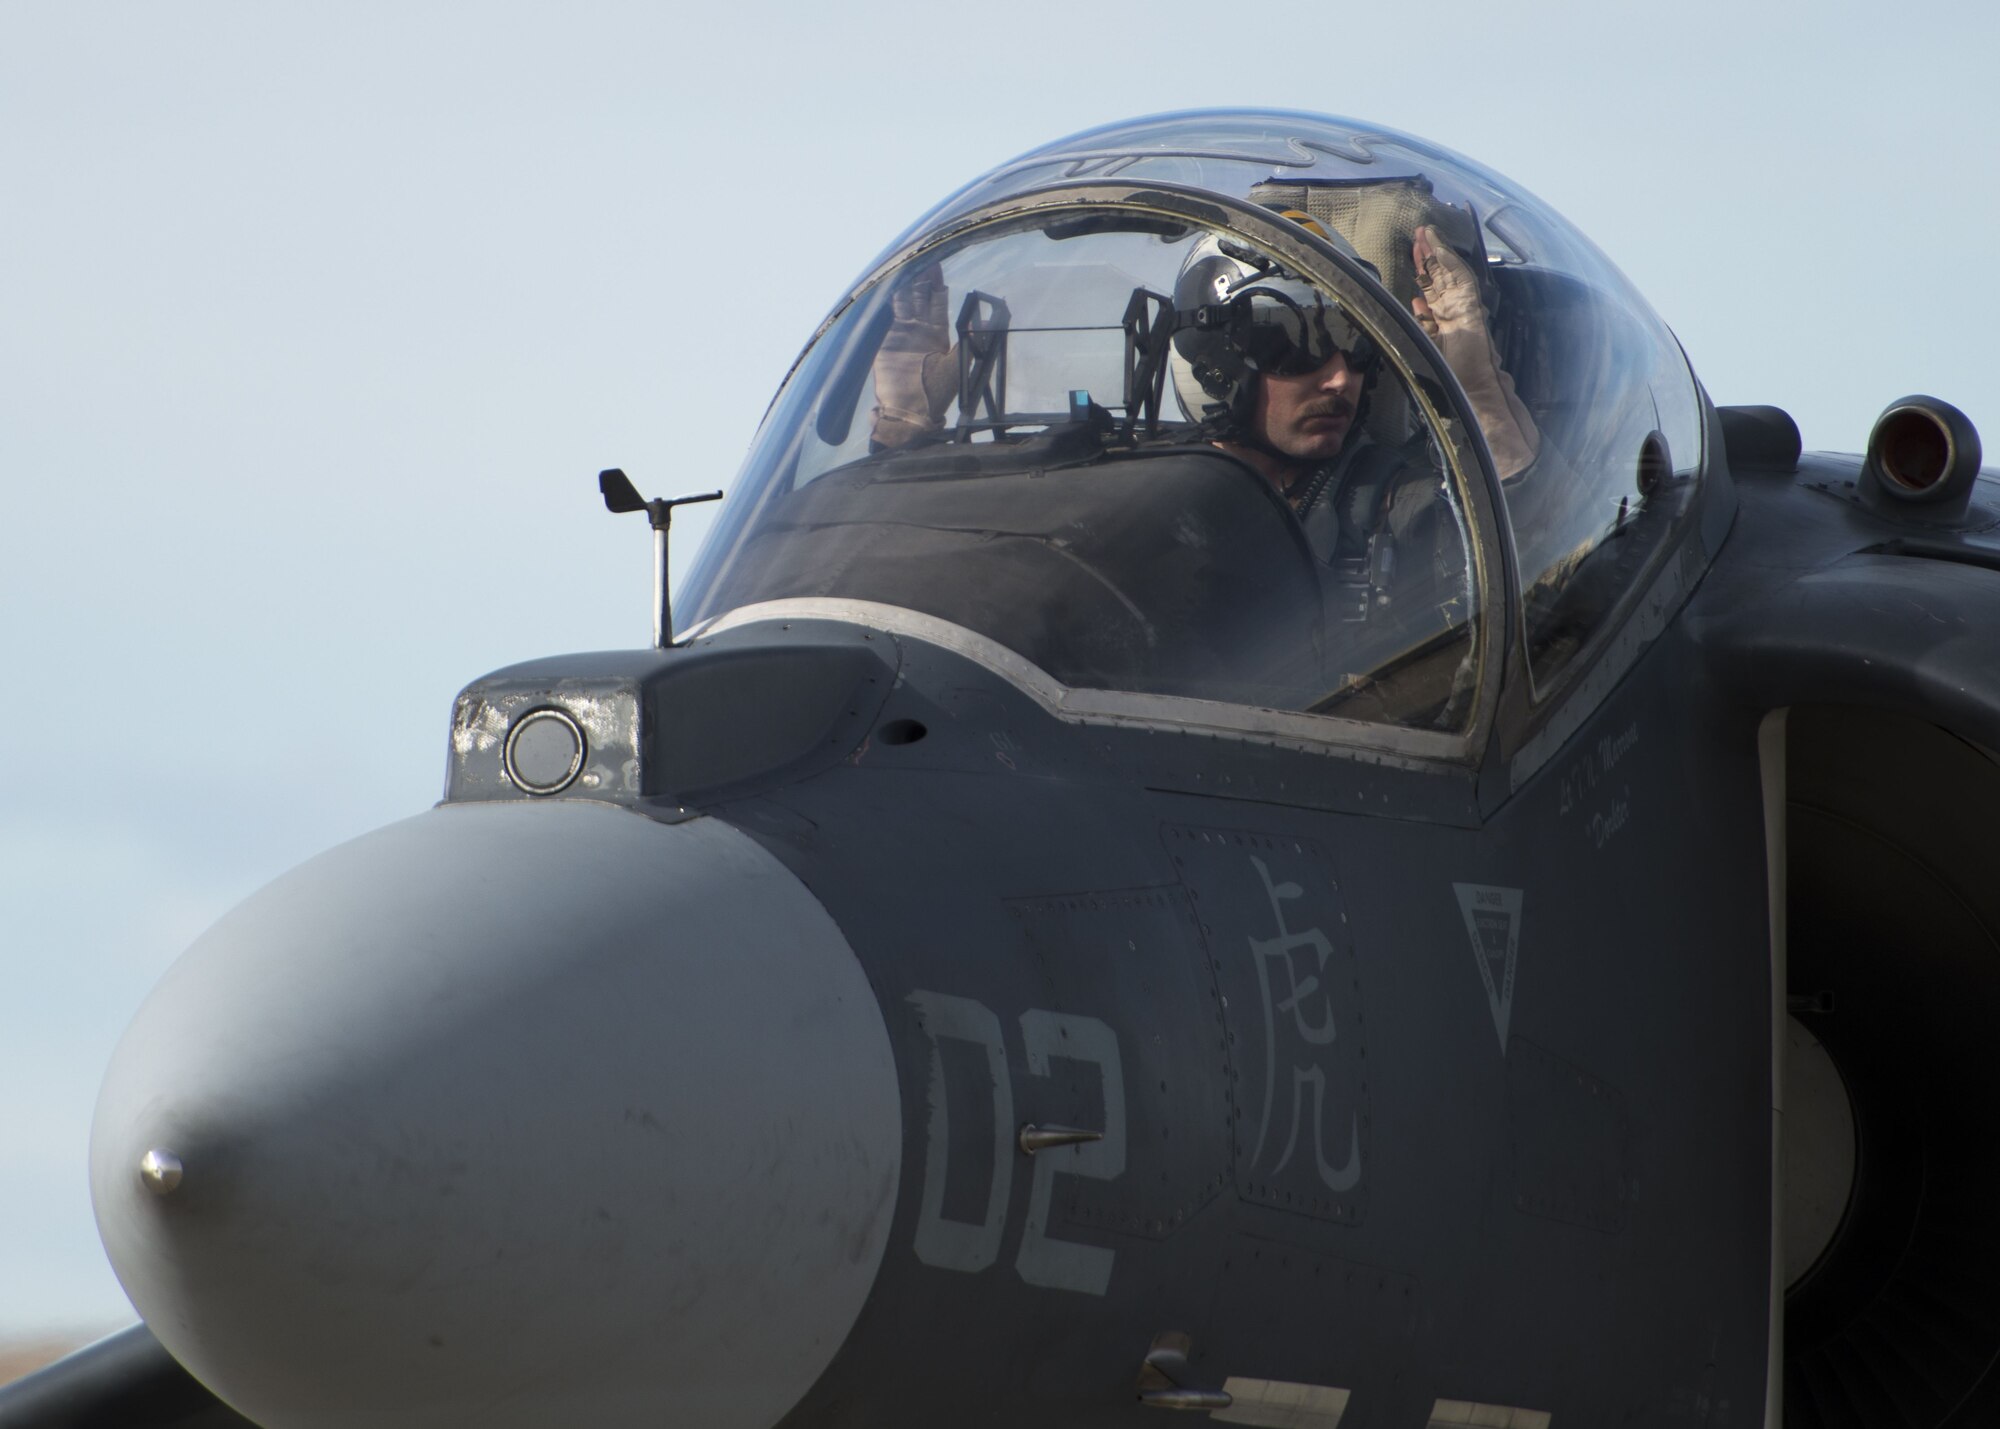 A Marine Attack Squadron 542 AV-8B Harrier II pilot gives hand signals during a pre-flight inspection Jan. 31, 2018, at Mountain Home Air Force Base, Idaho. The VMA-542 trained with the 366th Fighter Wing to experience mission operations under cold weather. (U.S. Air Force Photo by Airman 1st Class JaNae Capuno)